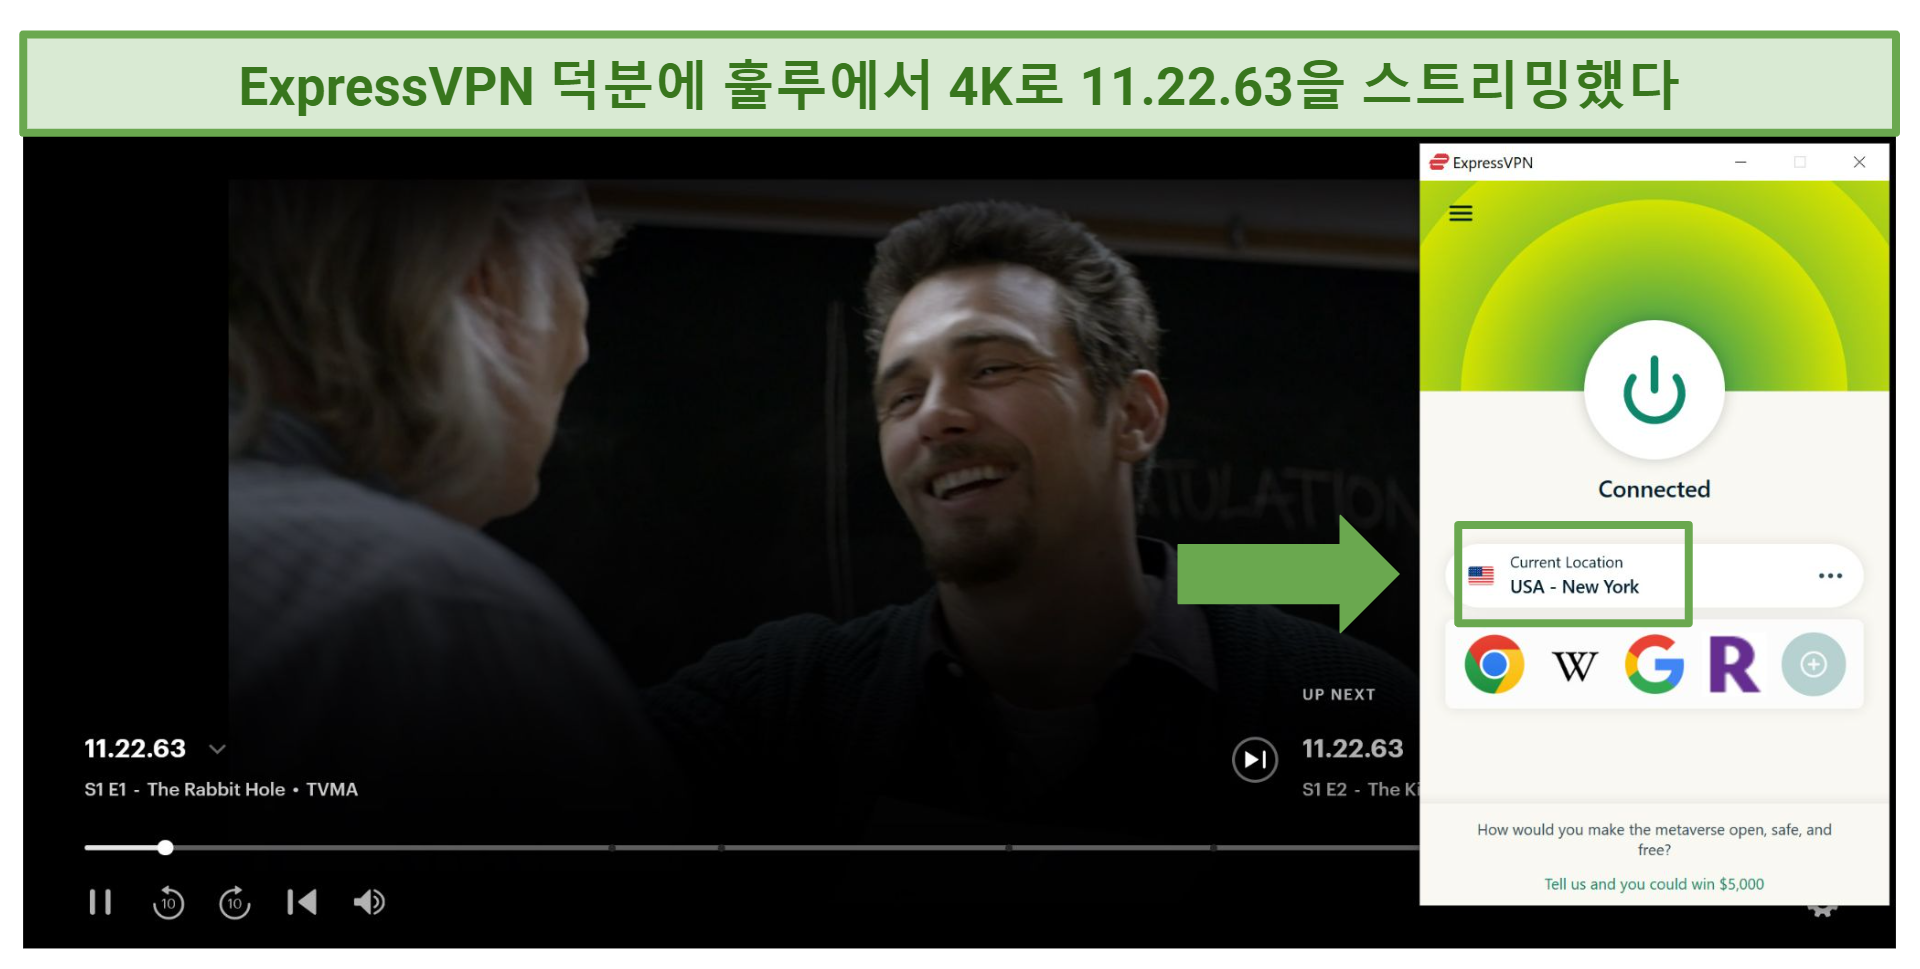 Screenshot of 11.22.63 streaming on Hulu with ExpressVPN active